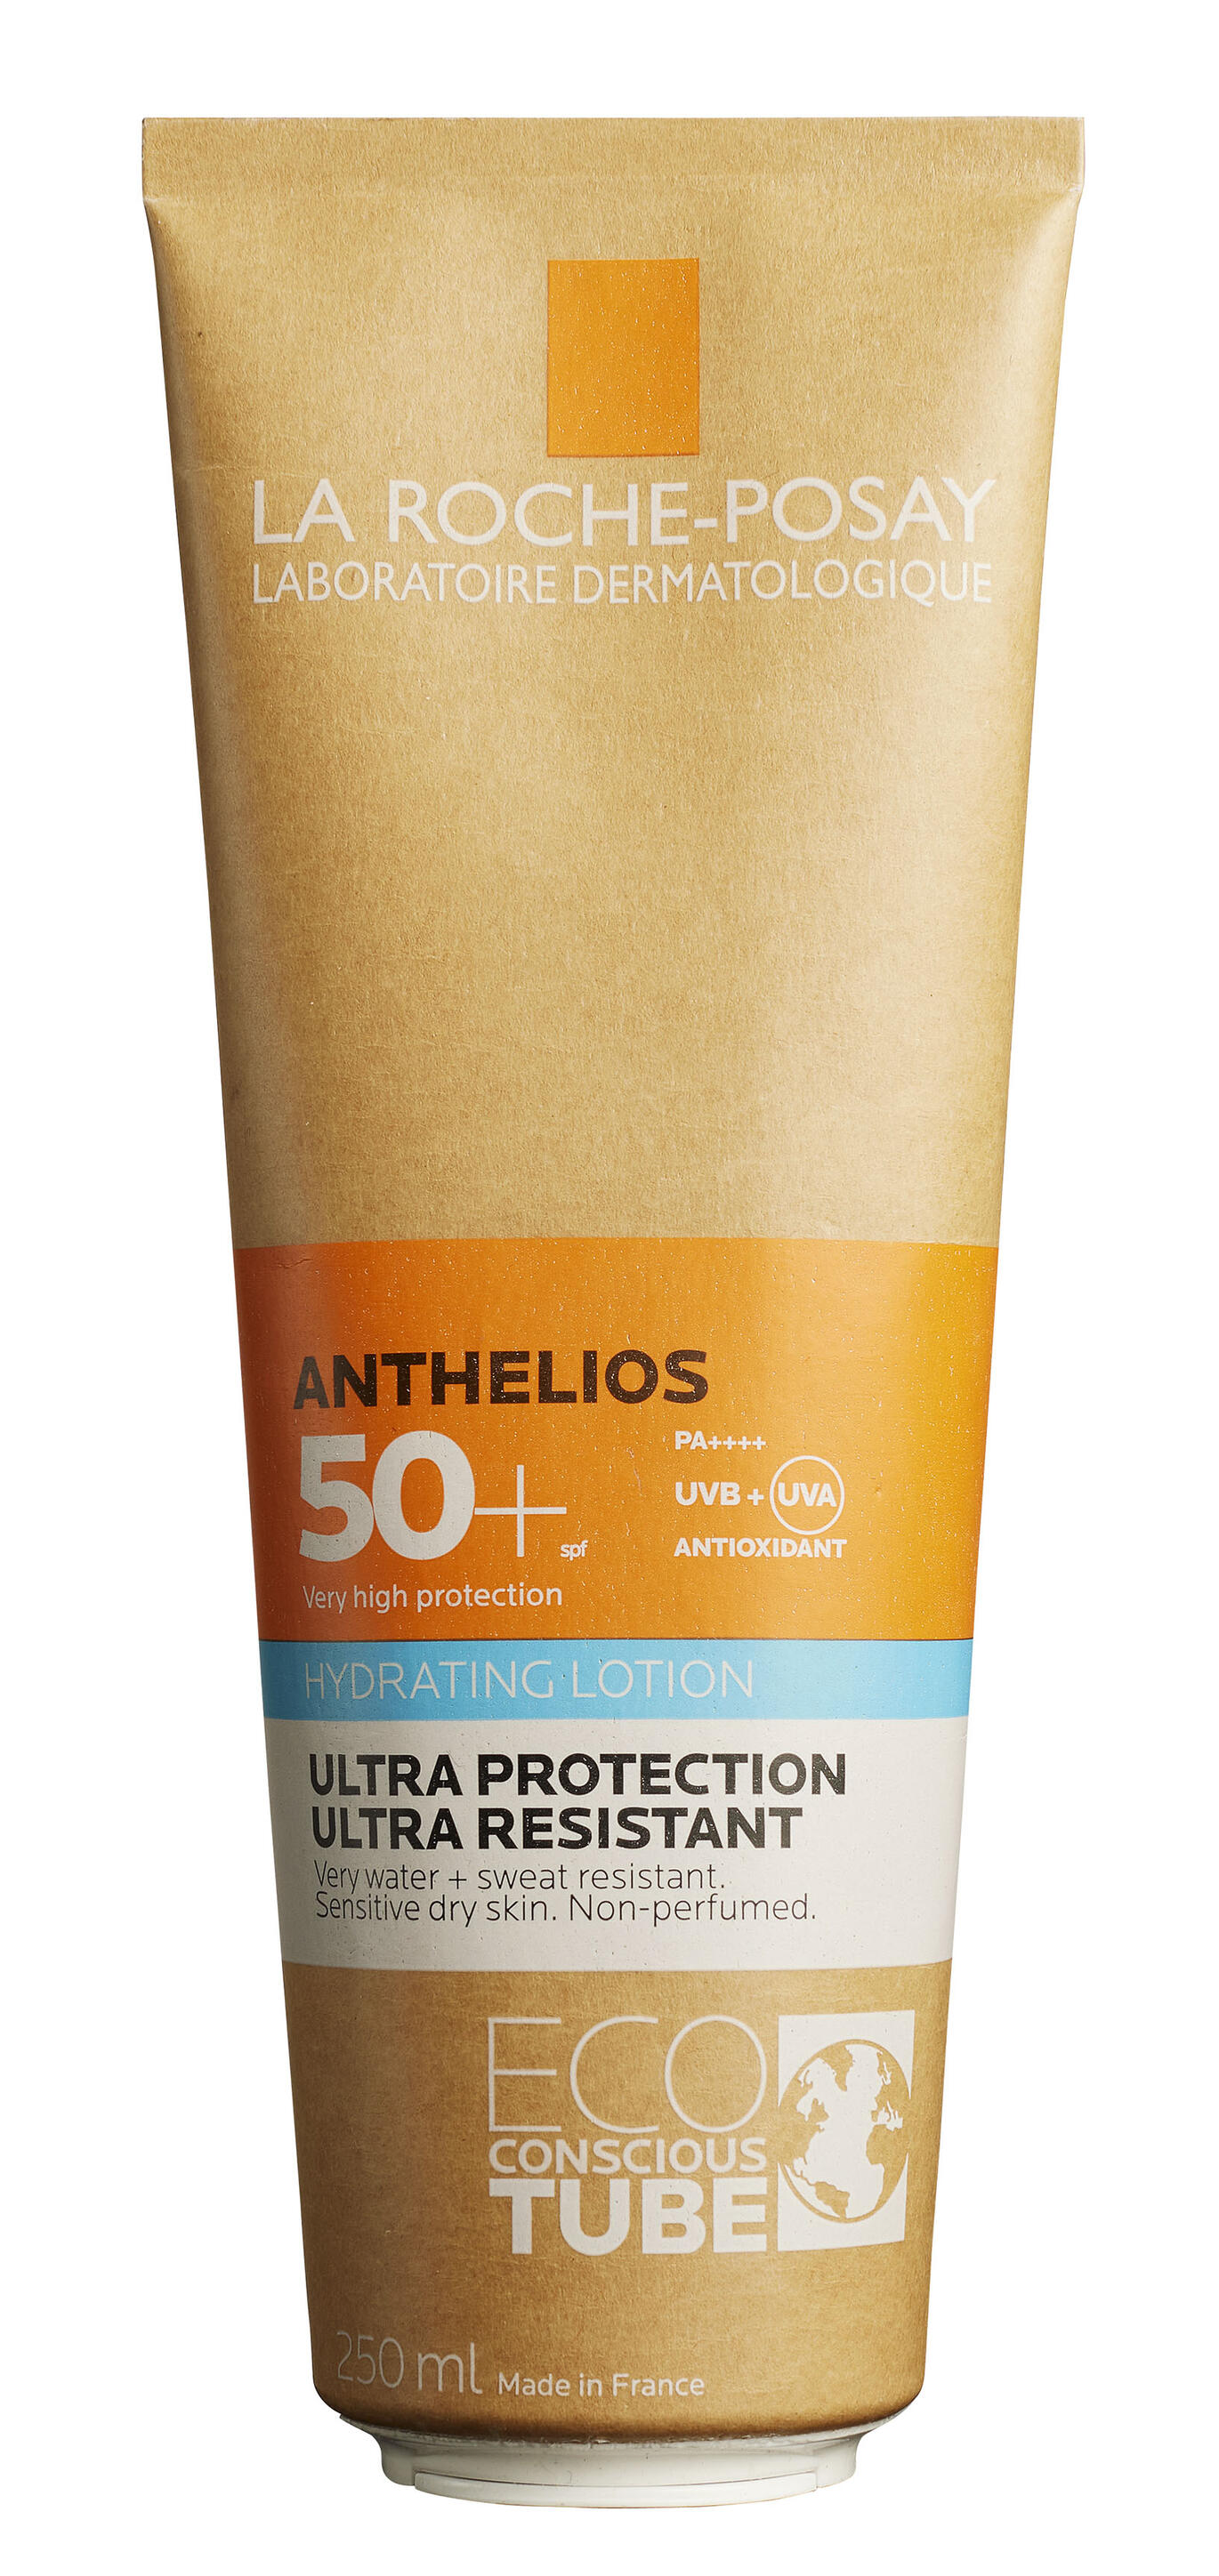 Hydrating lotion SPF 50+ La Roche-Posay Anthelios